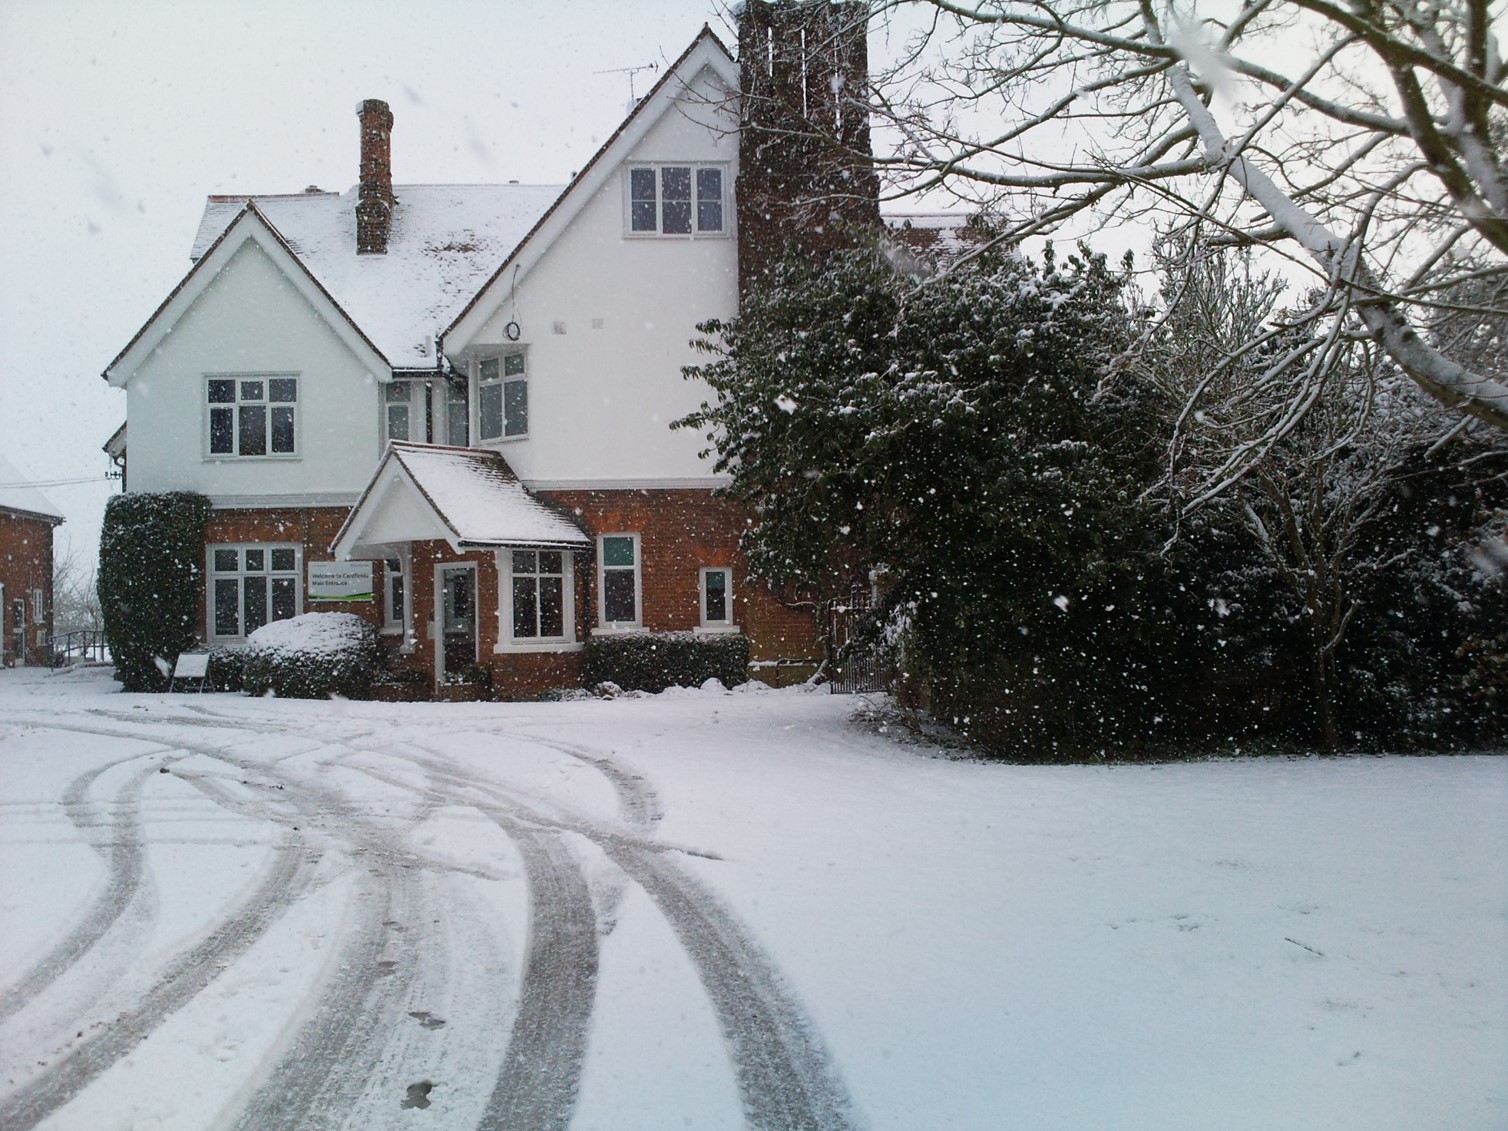 Cardfields house in the snow